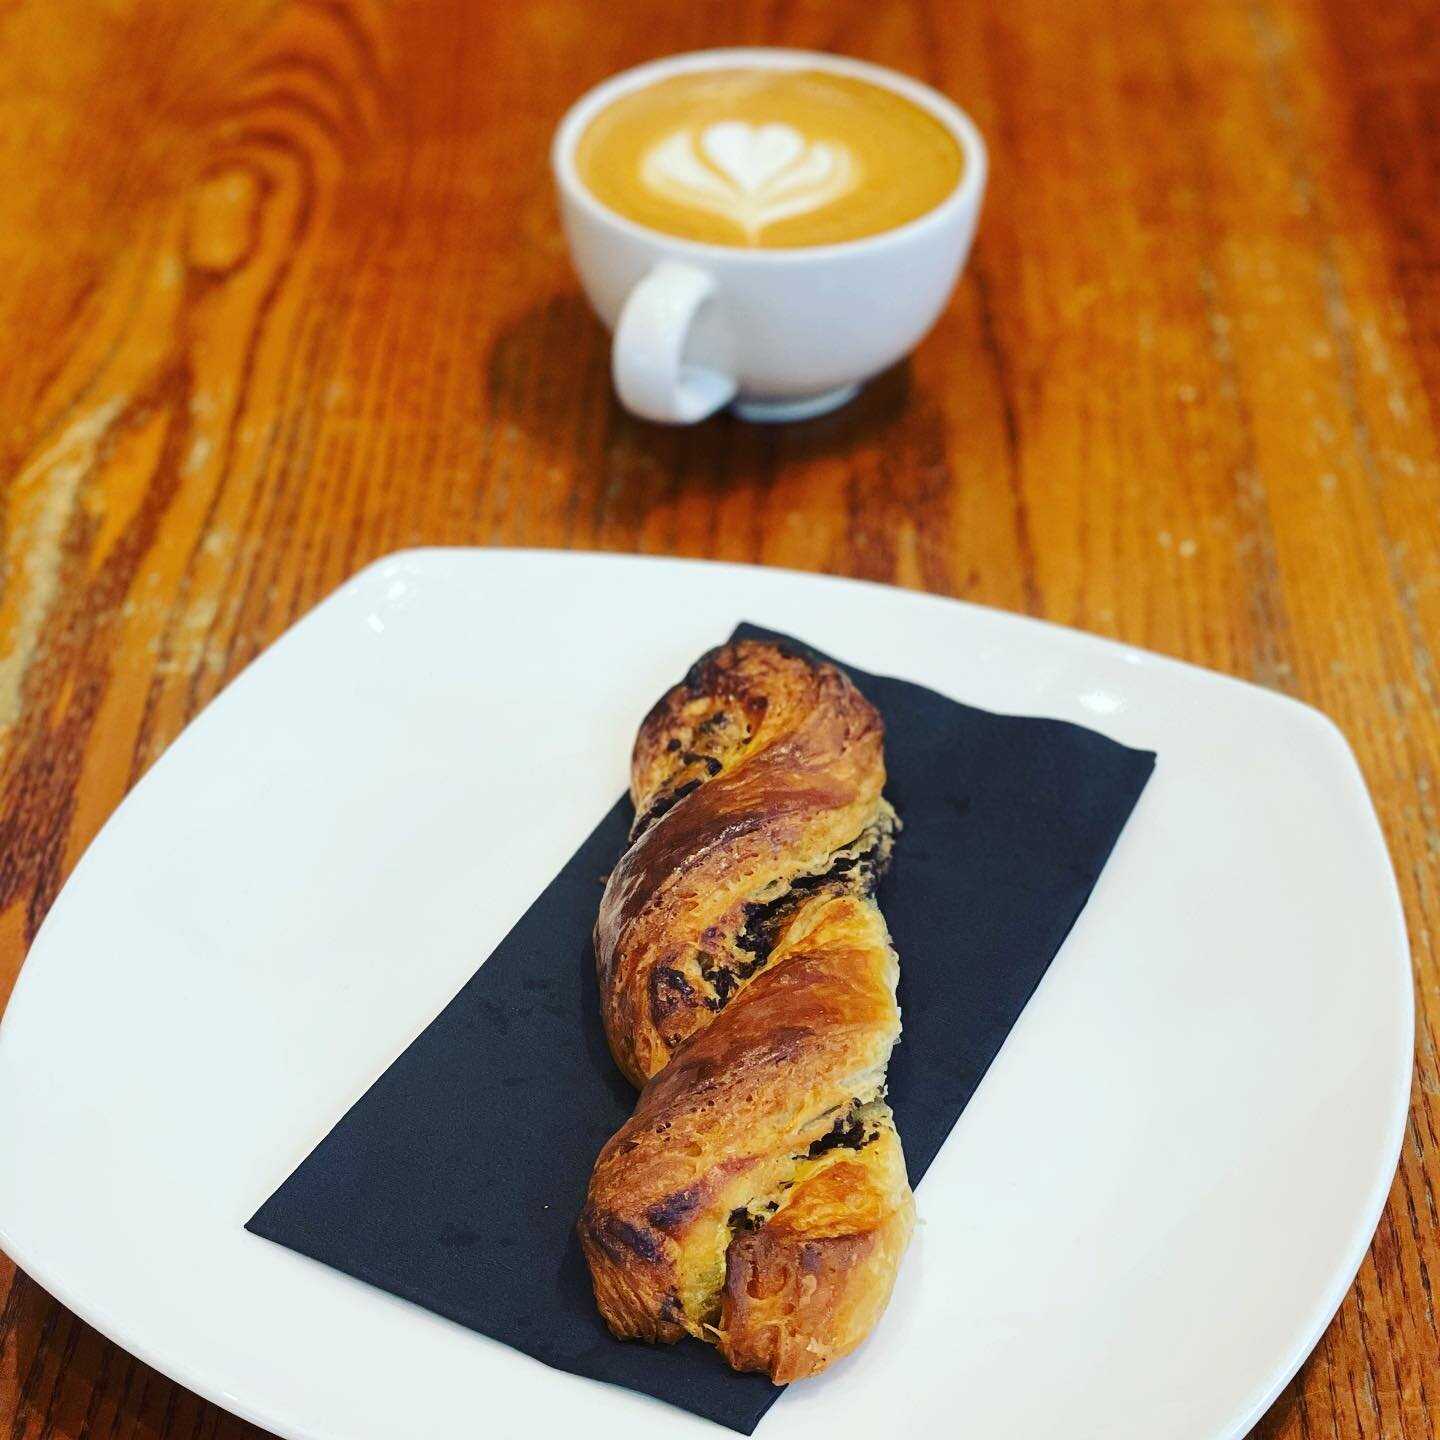 Chocolate twist made in house accompanied with the best tasting coffee about&hellip;. This is a sure winner !!

#coffee #pastry #pastrychef #foodie #restaurant